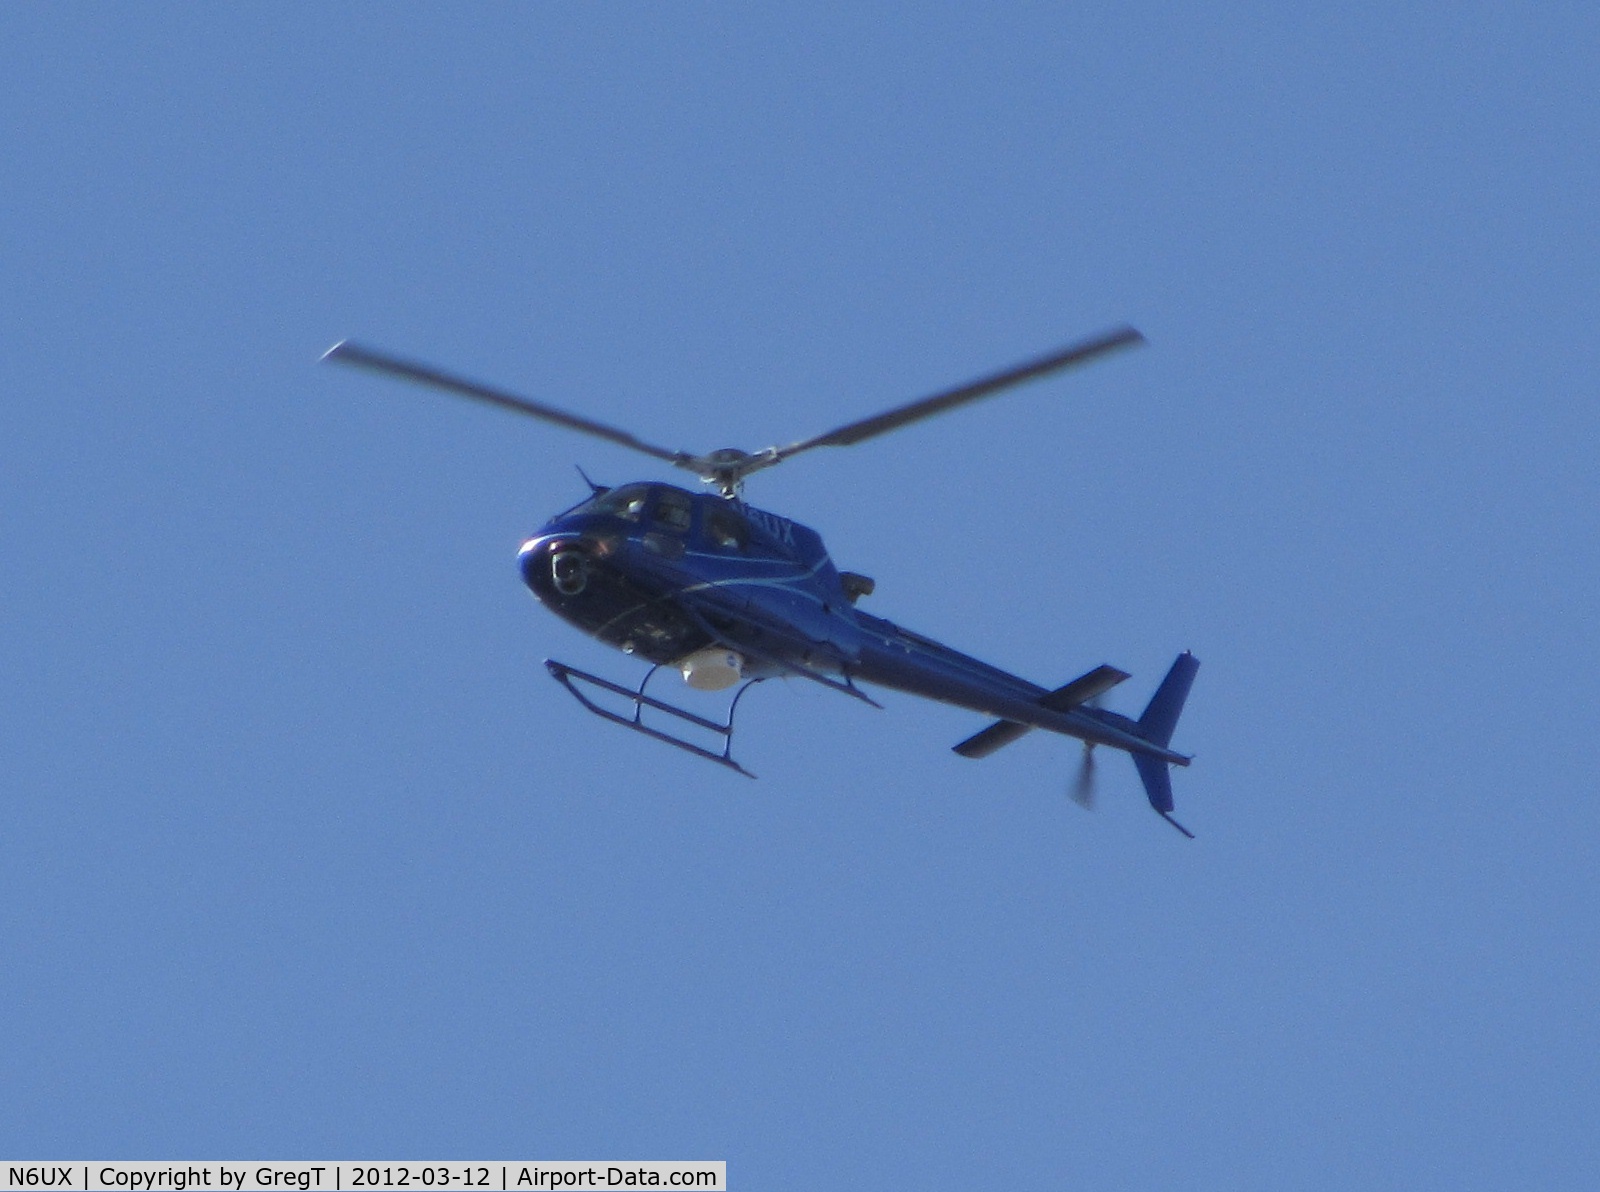 N6UX, 2003 Eurocopter AS-350B-3 Ecureuil Ecureuil C/N 3749, Over downtown Ft Collins